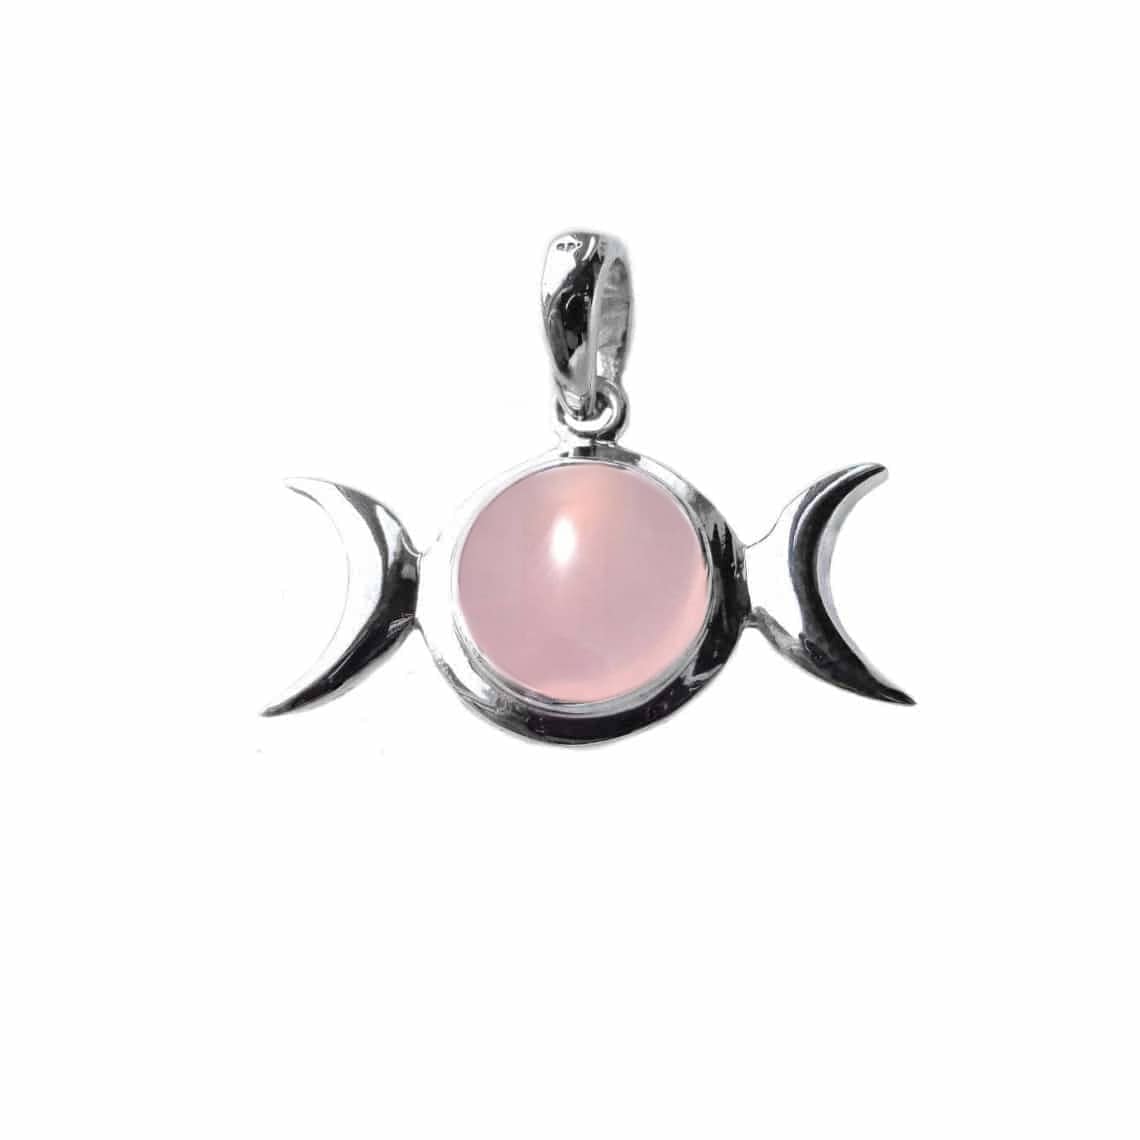 Buy LUNAR Crescent Moon Necklace Upside Down Moon Necklace Online in India  